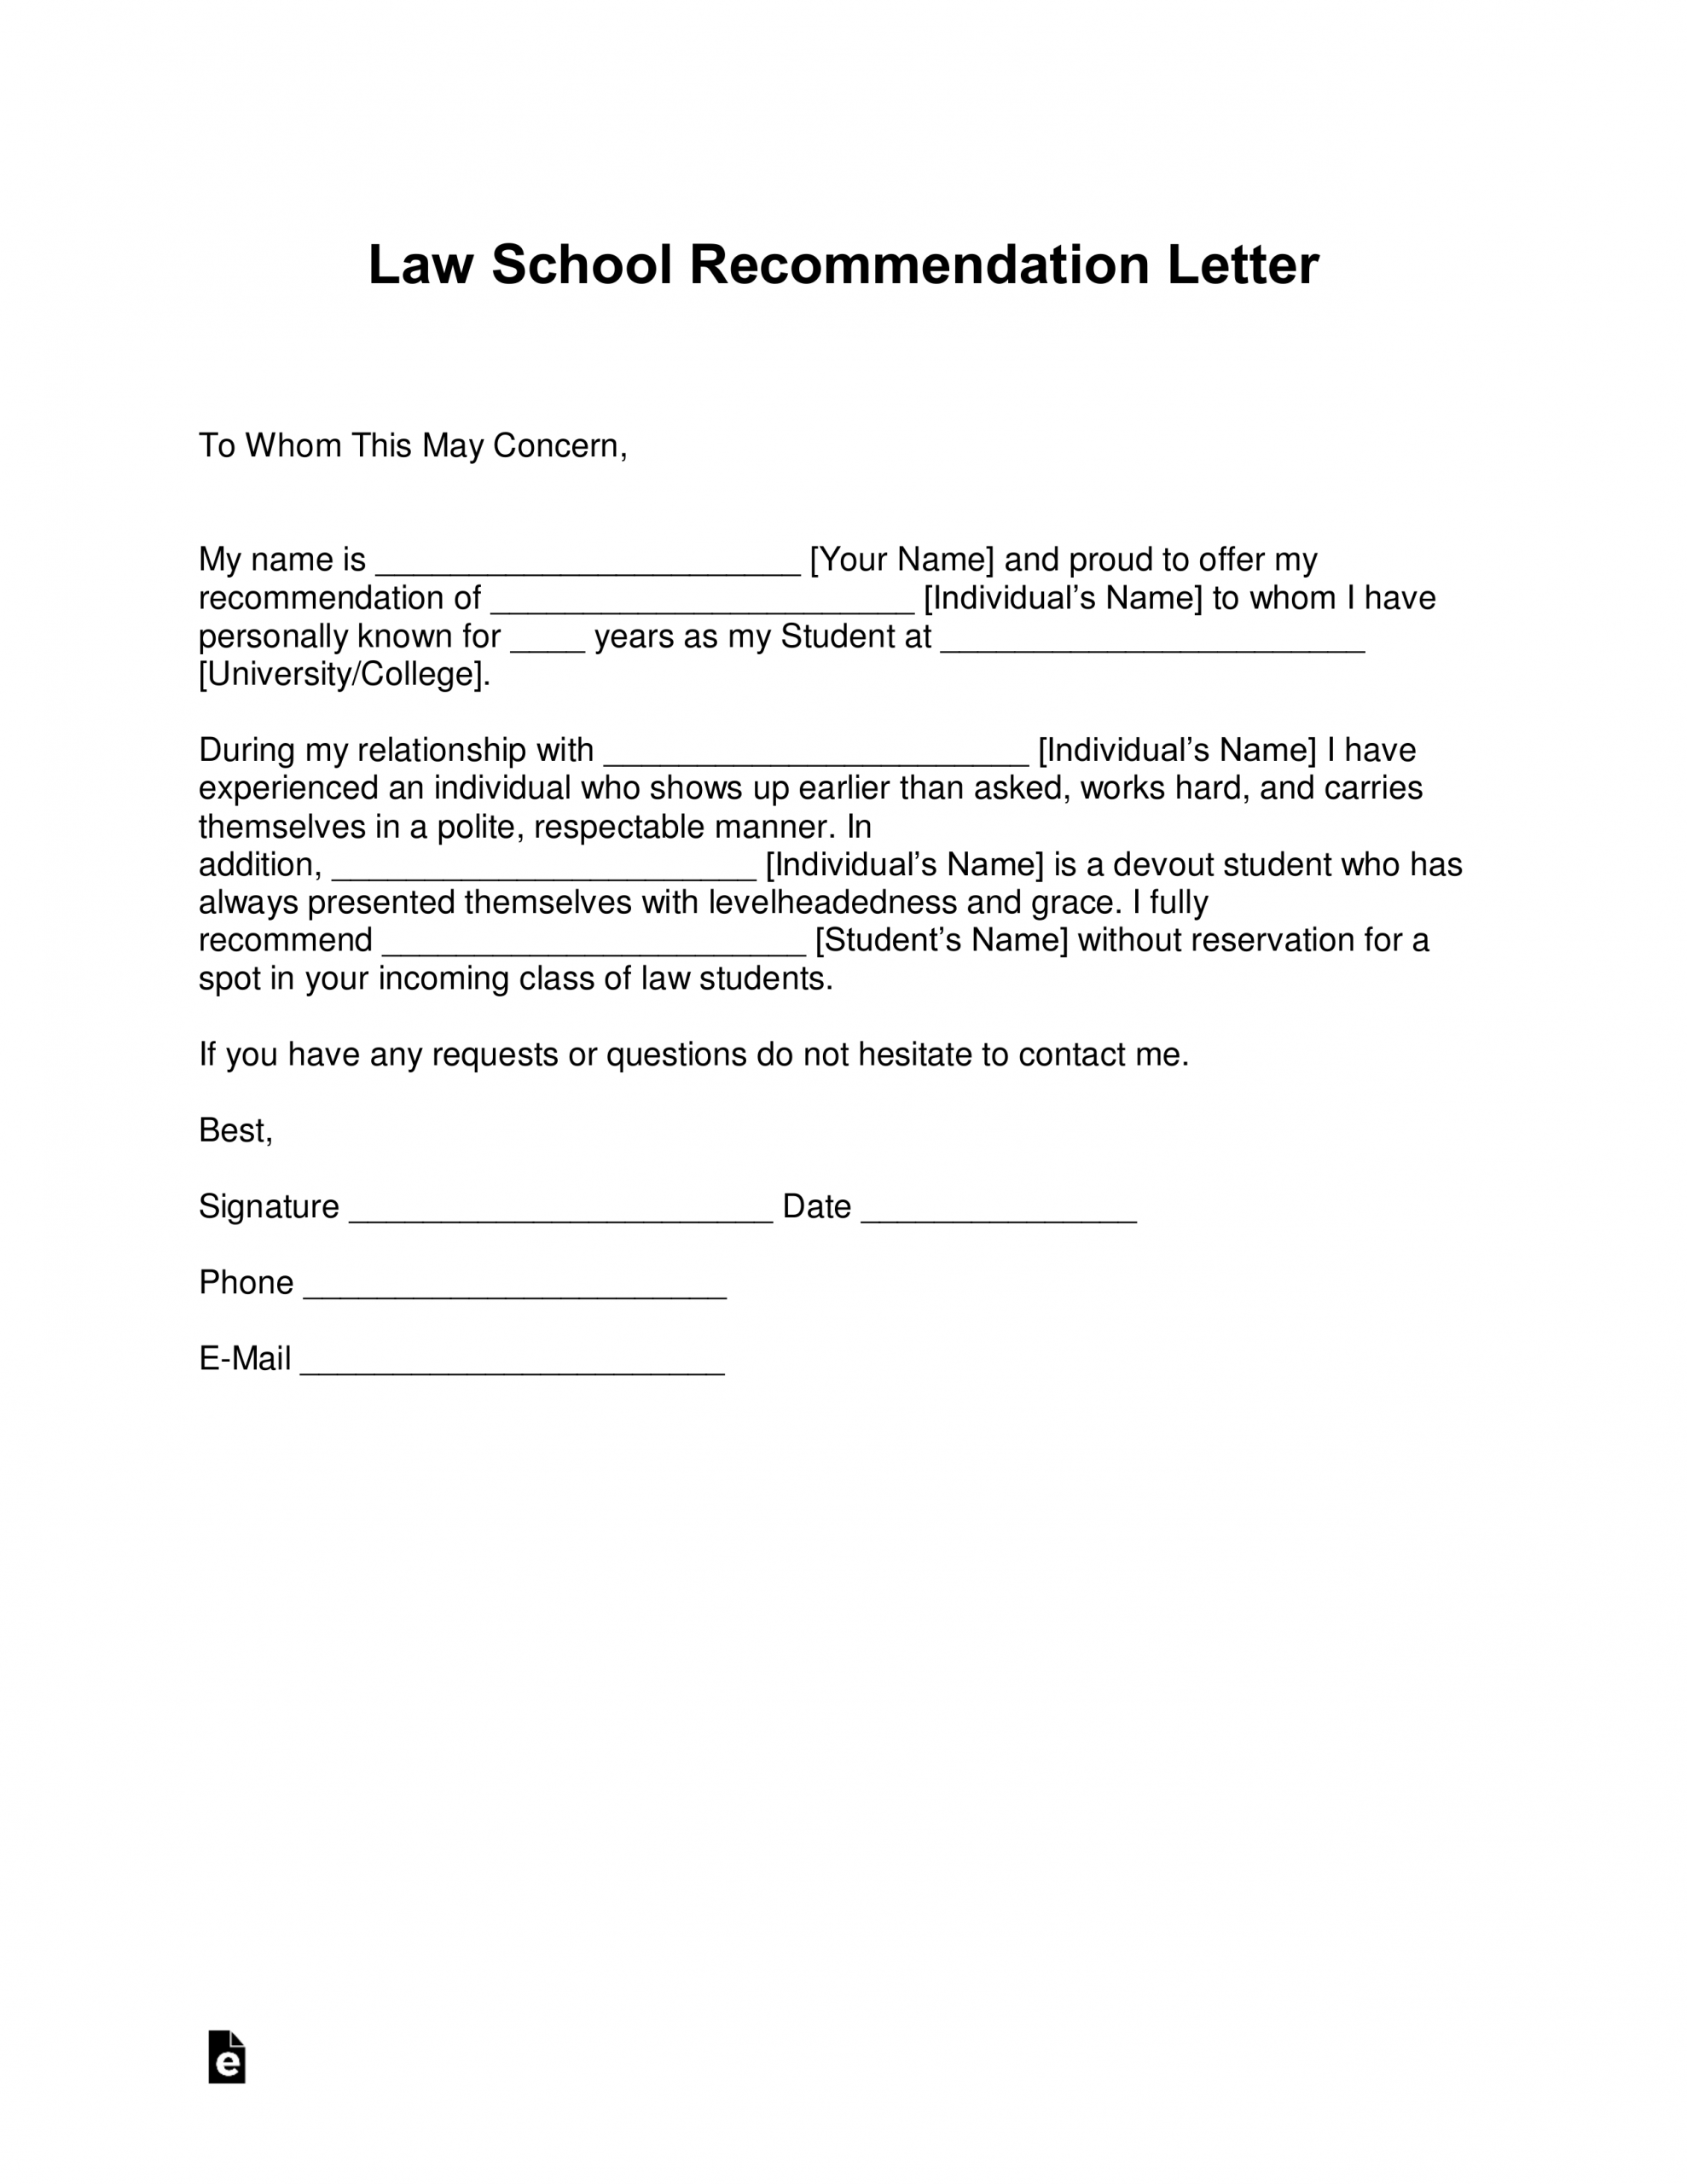 Free Law School Recommendation Letter Templates With inside size 2550 X 3301